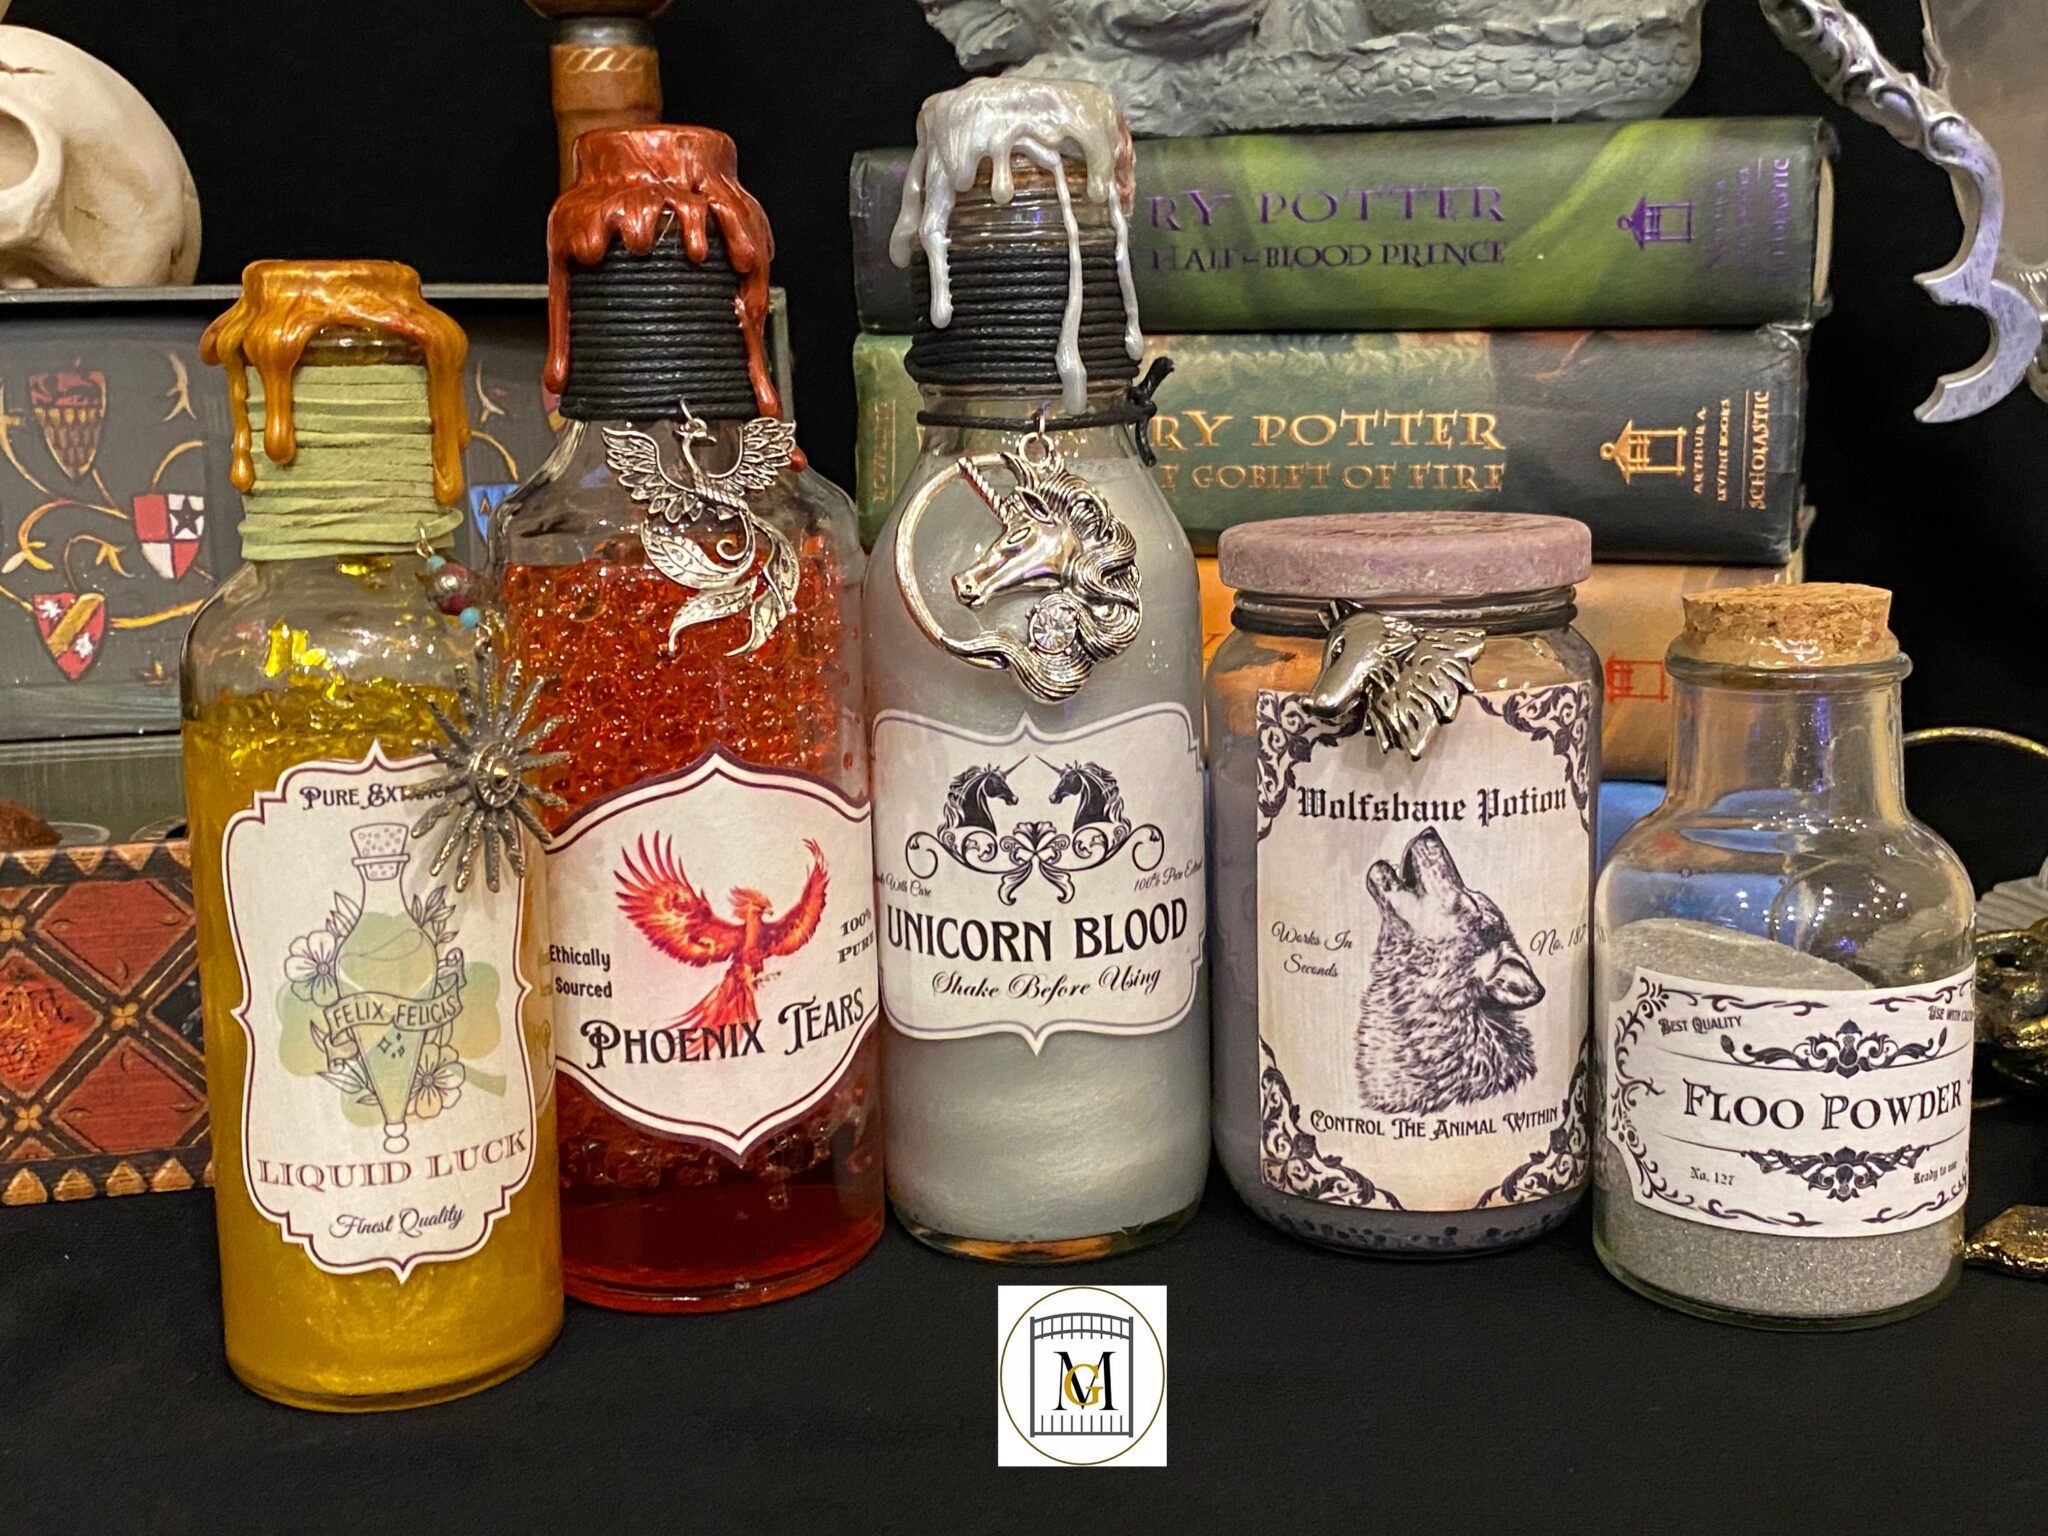 How to make drinkable Harry Potter potions (VERY EASY) 